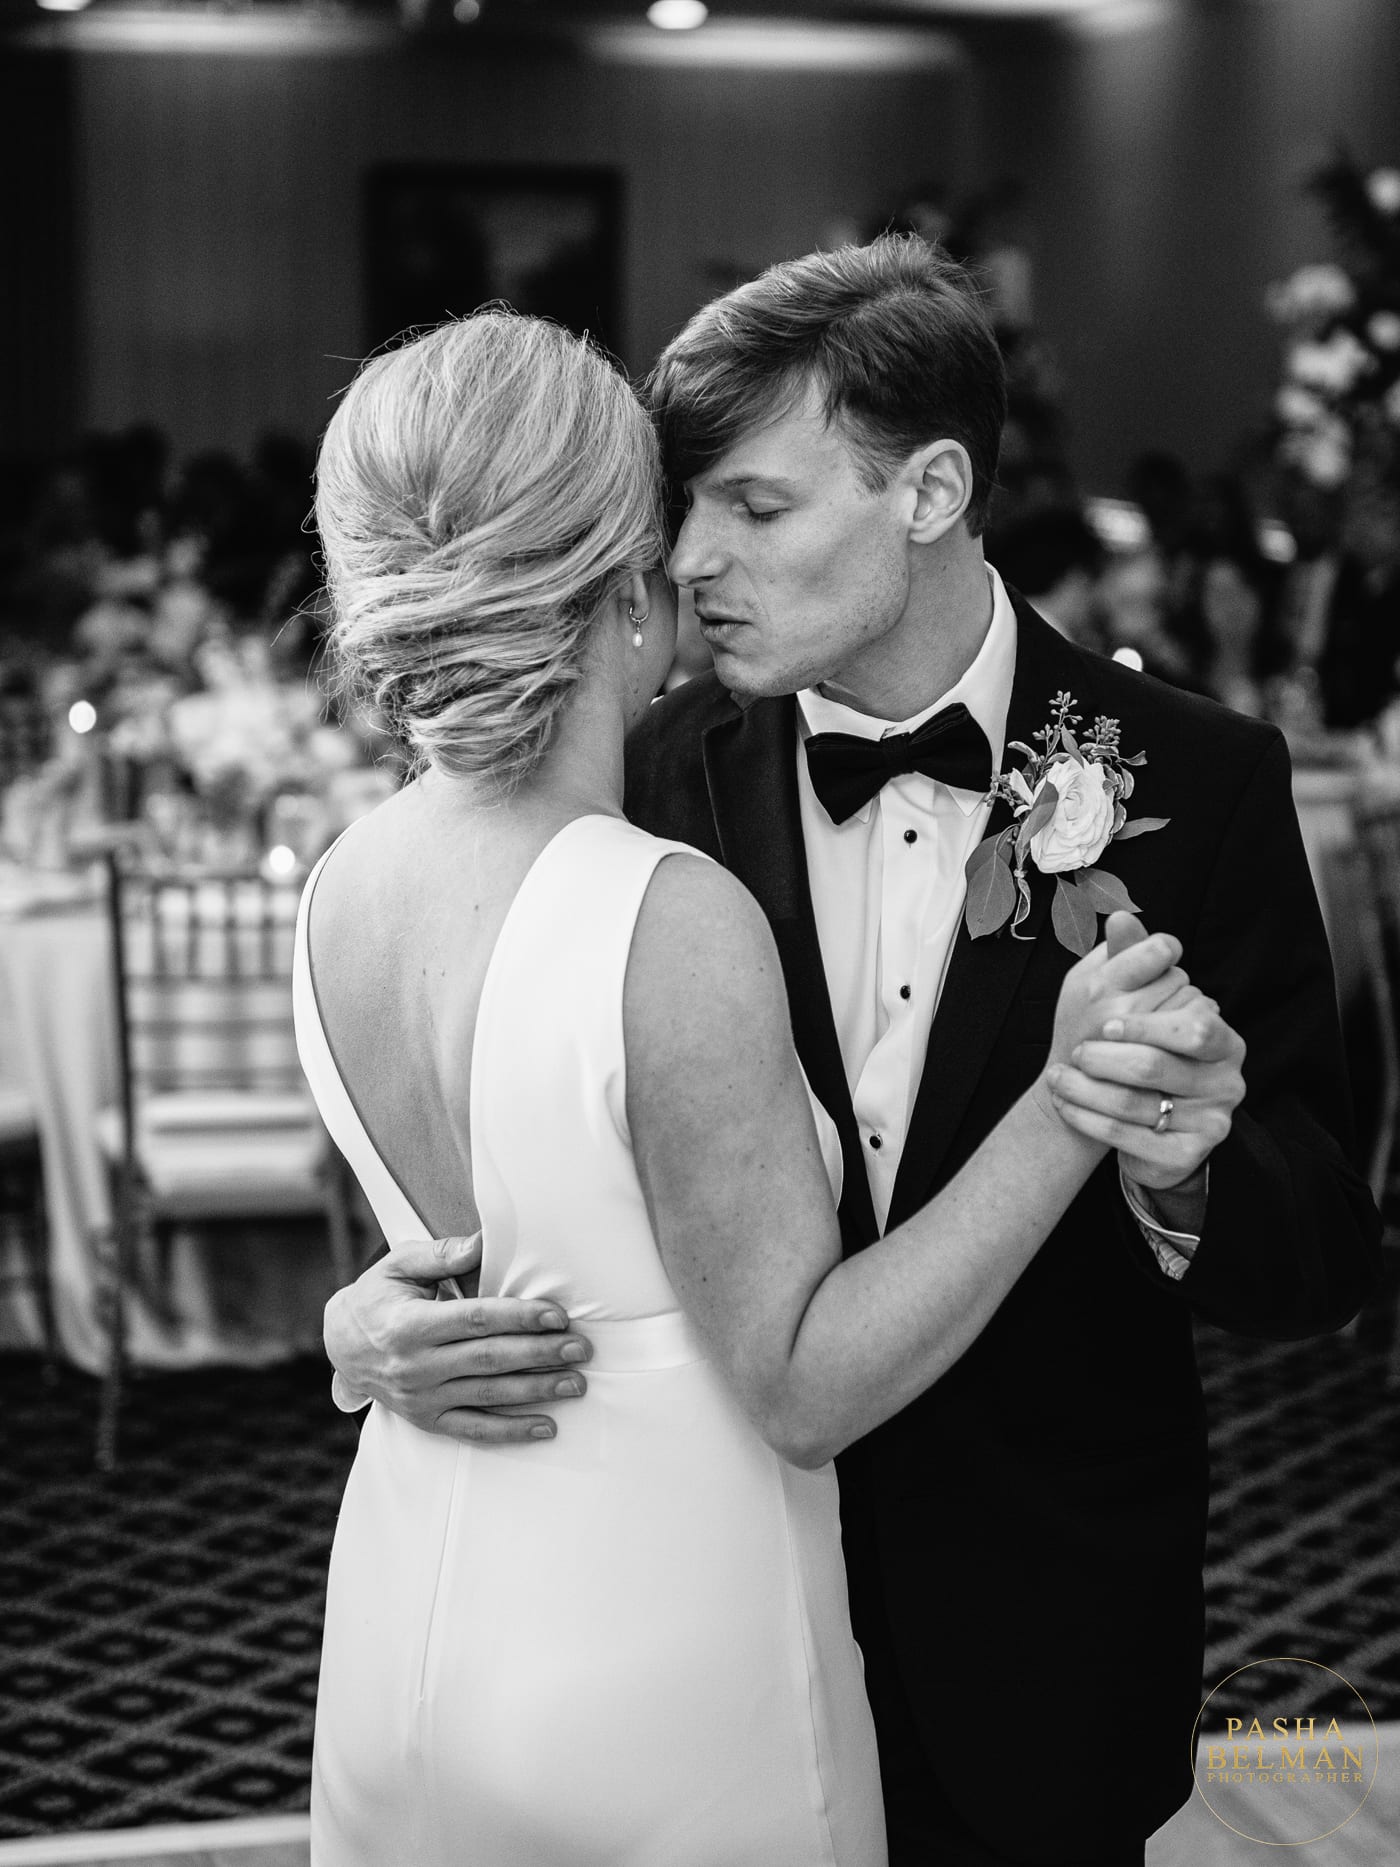 Debordieu Club, Georgetown SC Wedding Photographer - First Dance in Black and White